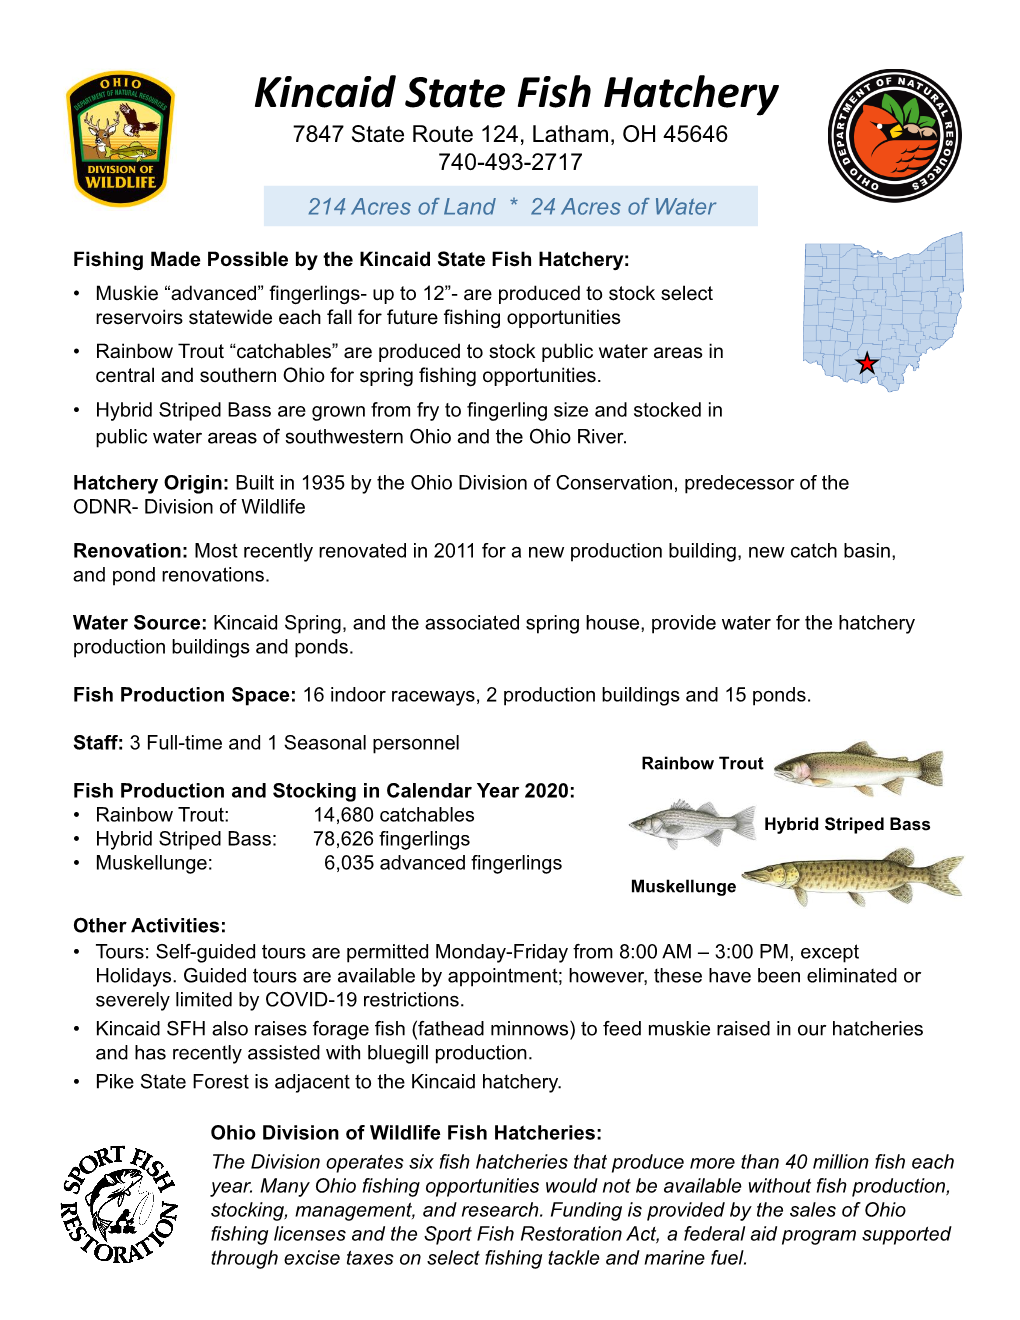 Kincaid State Fish Hatchery 7847 State Route 124, Latham, OH 45646 740-493-2717 214 Acres of Land * 24 Acres of Water